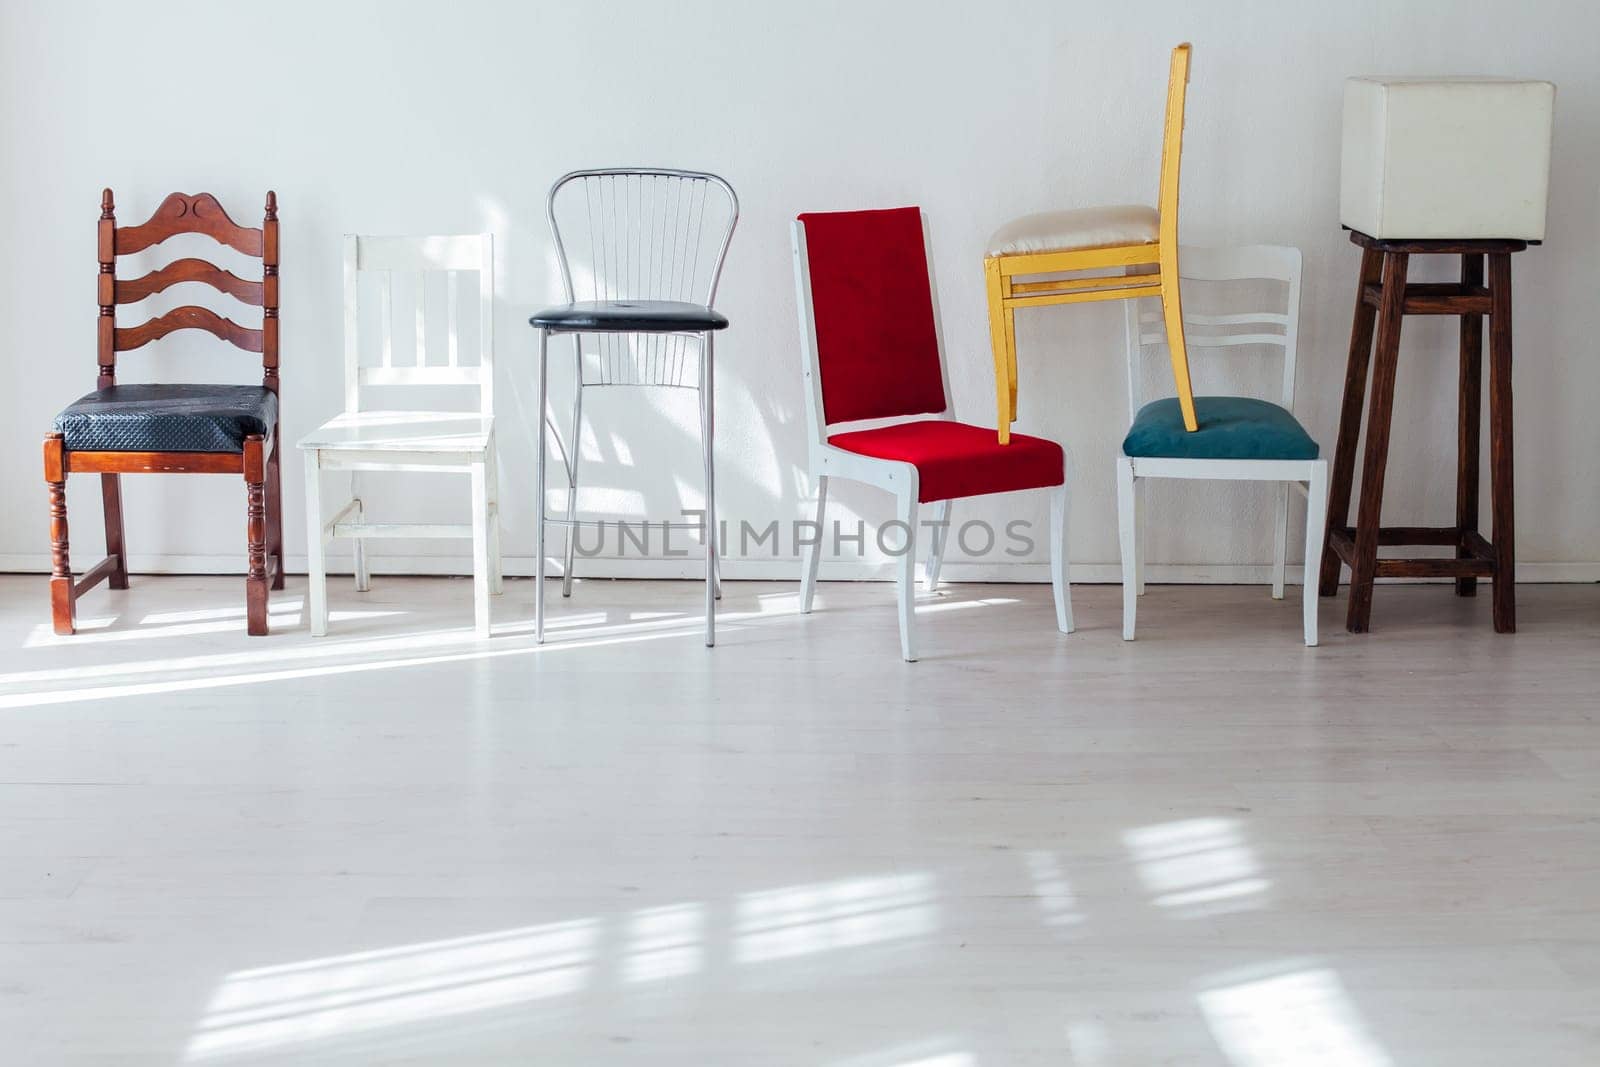 many multicolored chairs in the mess of the white room by Simakov